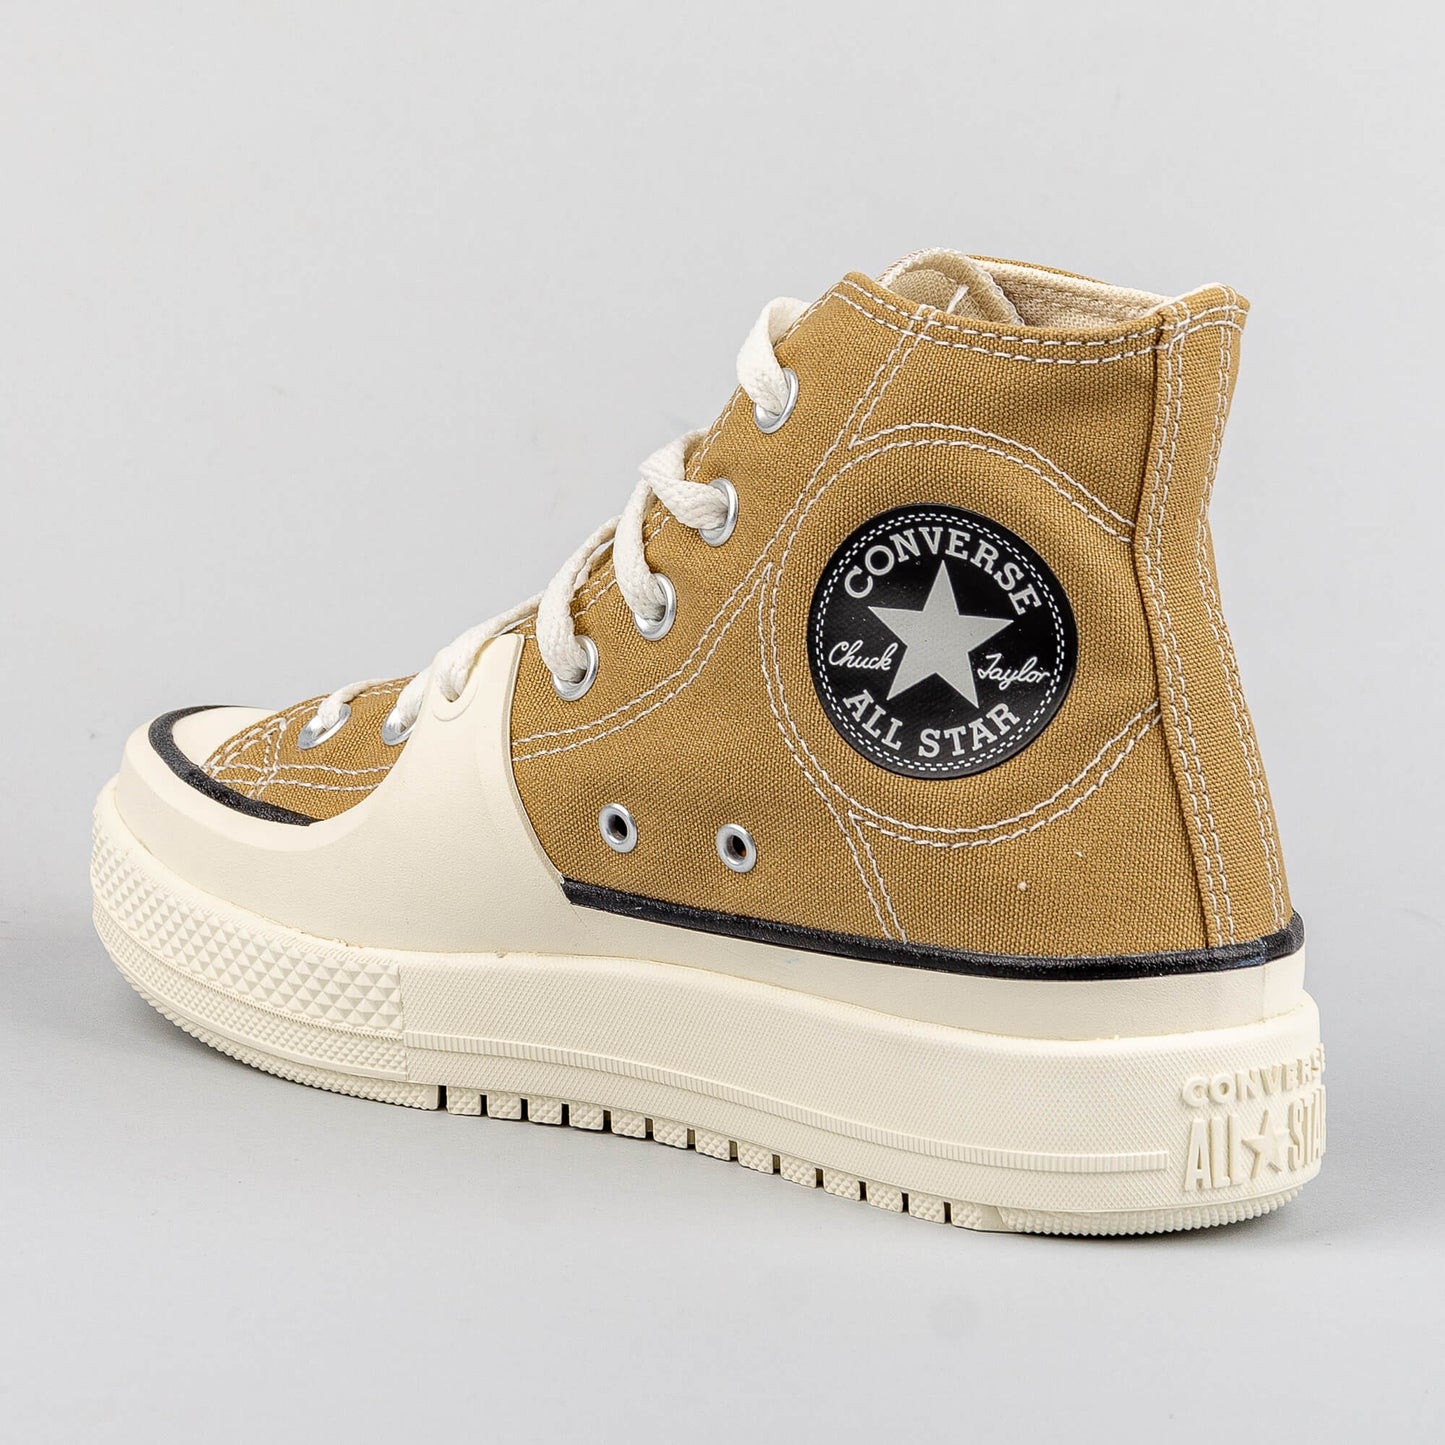 Converse Chuck Taylor All Star Construct Roasted/Black/Egret